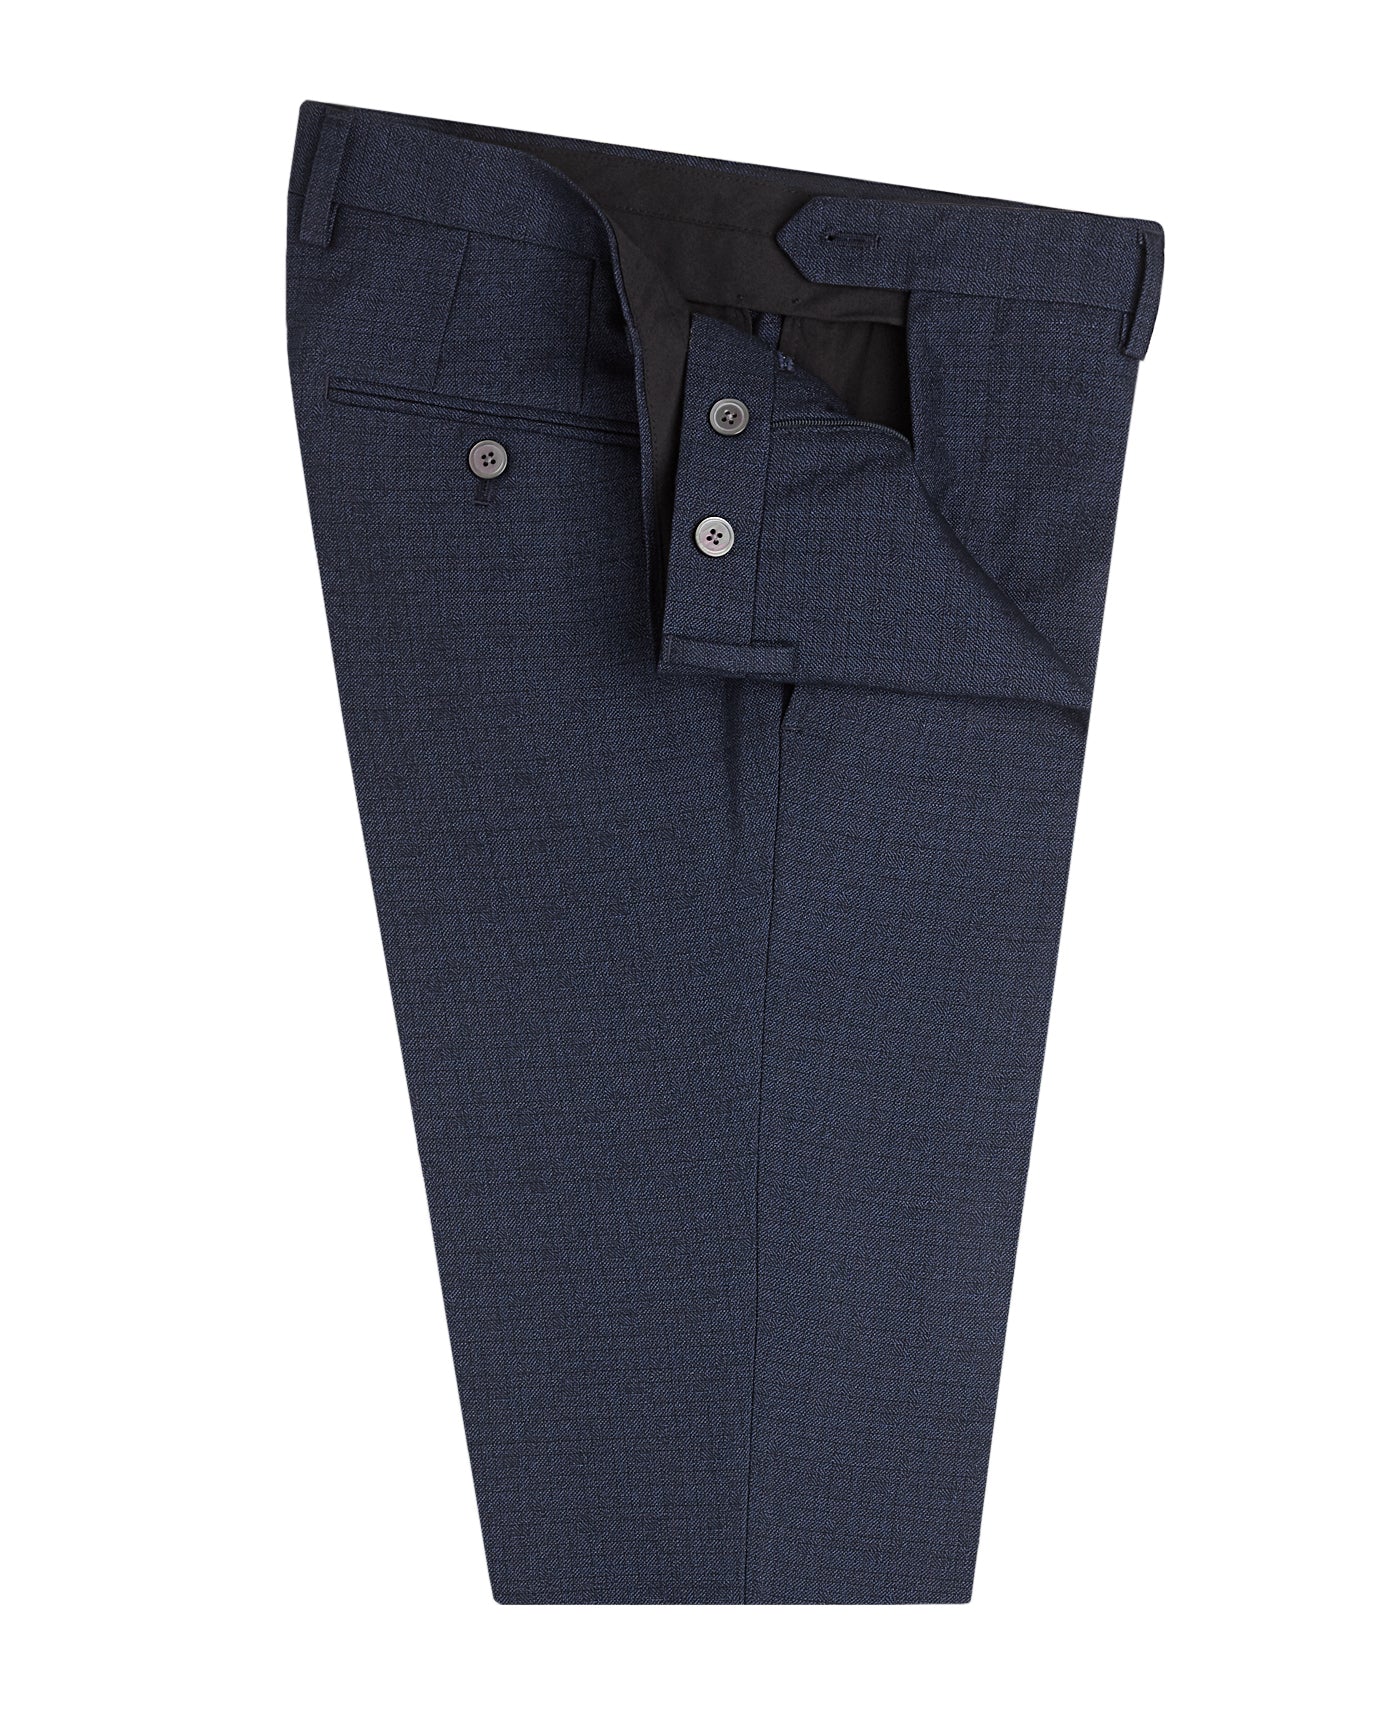 Image 1 of Clapton Skinny Fit Navy Textured Trousers